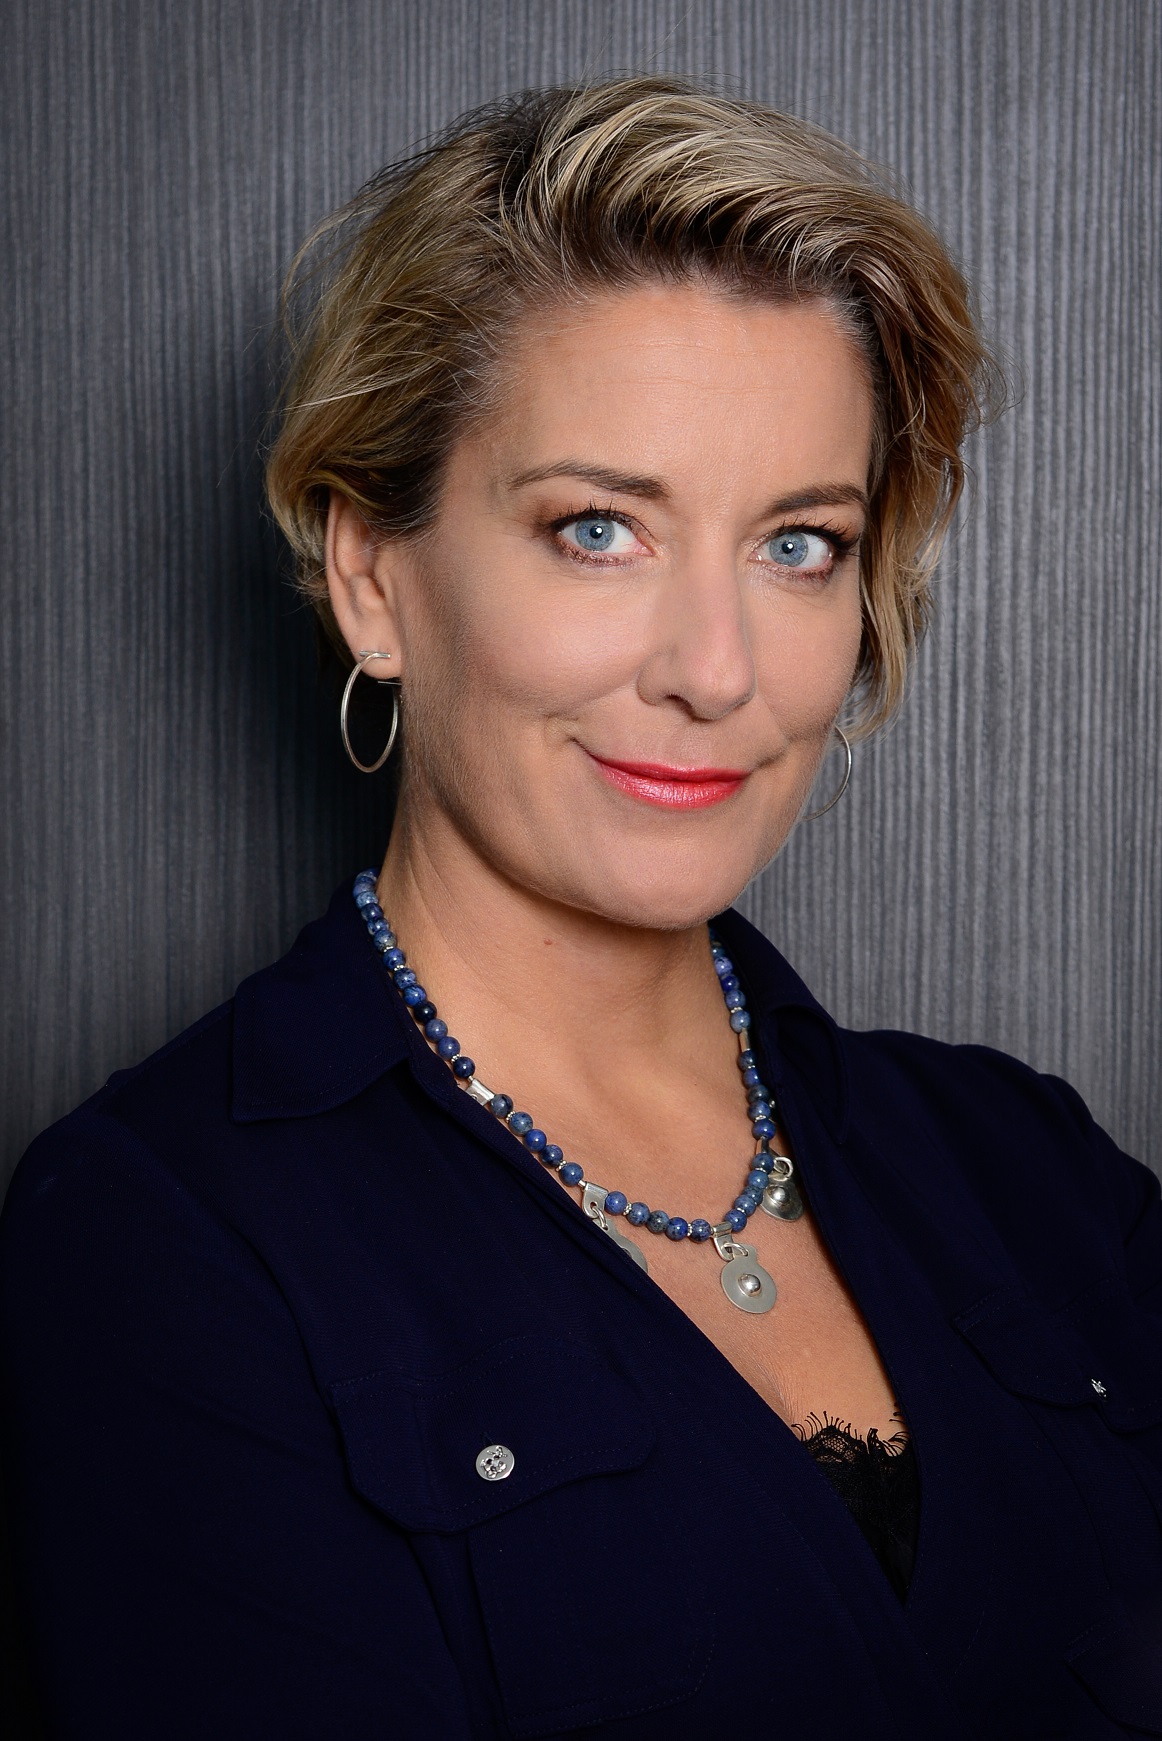 Virtual delegates will be hosted by Anna Bjurstam, Six Senses Wellness Pioneer and a GWS Board Member